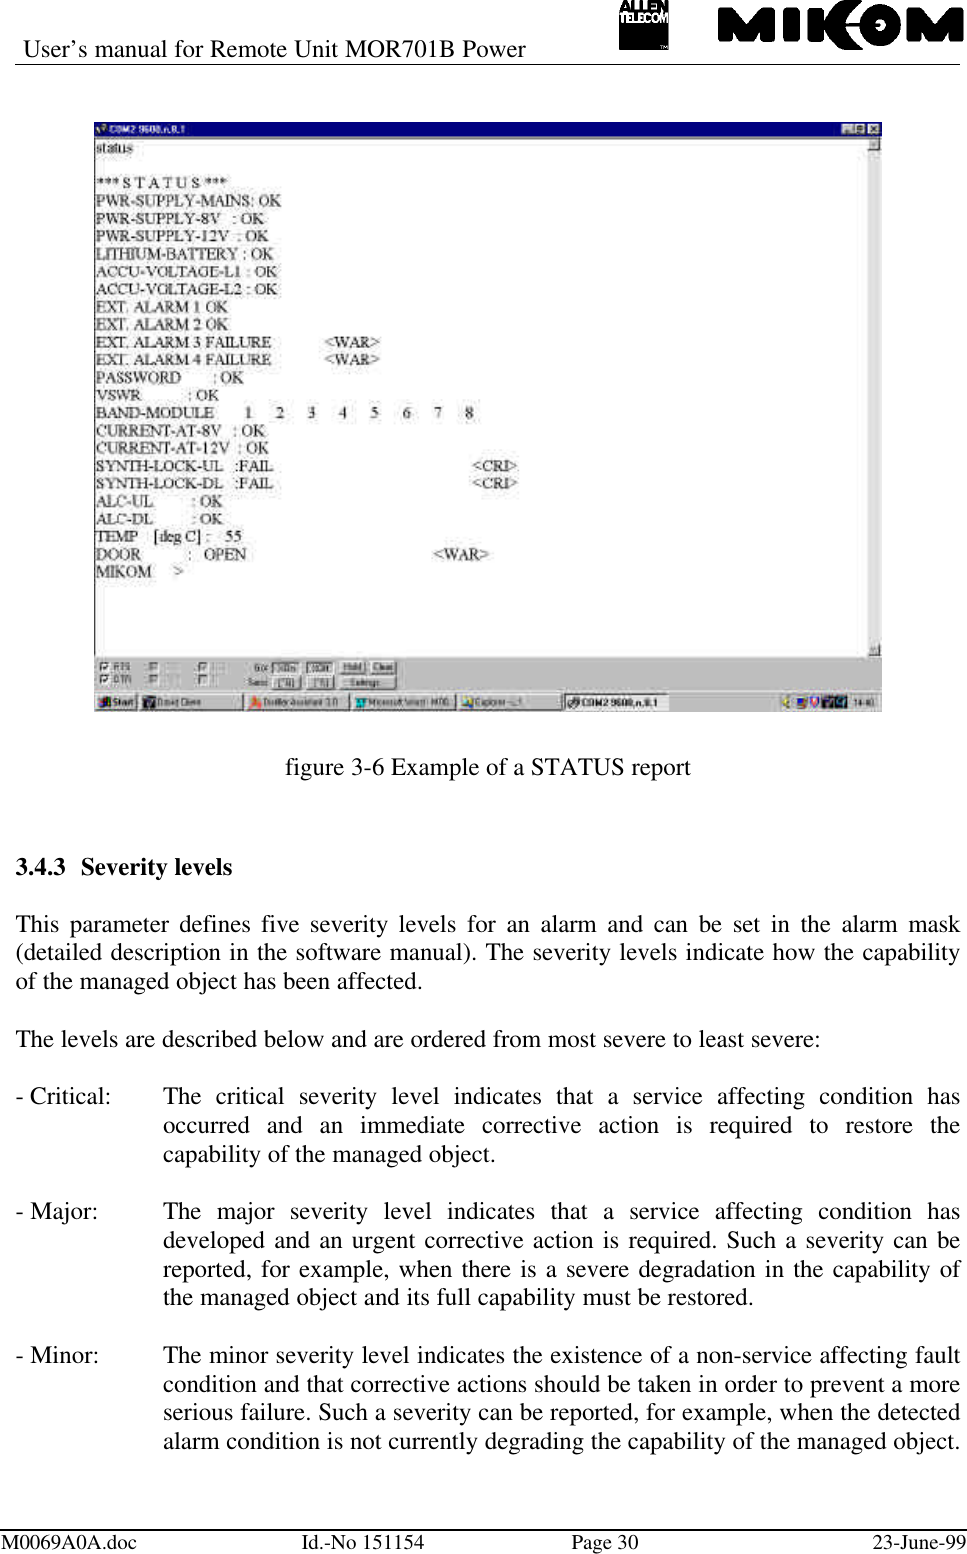 User’s manual for Remote Unit MOR701B PowerM0069A0A.doc Id.-No 151154 Page 30 23-June-99figure 3-6 Example of a STATUS report3.4.3 Severity levelsThis parameter defines five severity levels for an alarm and can be set in the alarm mask(detailed description in the software manual). The severity levels indicate how the capabilityof the managed object has been affected.The levels are described below and are ordered from most severe to least severe:- Critical: The critical severity level indicates that a service affecting condition hasoccurred and an immediate corrective action is required to restore thecapability of the managed object.- Major: The major severity level indicates that a service affecting condition hasdeveloped and an urgent corrective action is required. Such a severity can bereported, for example, when there is a severe degradation in the capability ofthe managed object and its full capability must be restored.- Minor: The minor severity level indicates the existence of a non-service affecting faultcondition and that corrective actions should be taken in order to prevent a moreserious failure. Such a severity can be reported, for example, when the detectedalarm condition is not currently degrading the capability of the managed object.